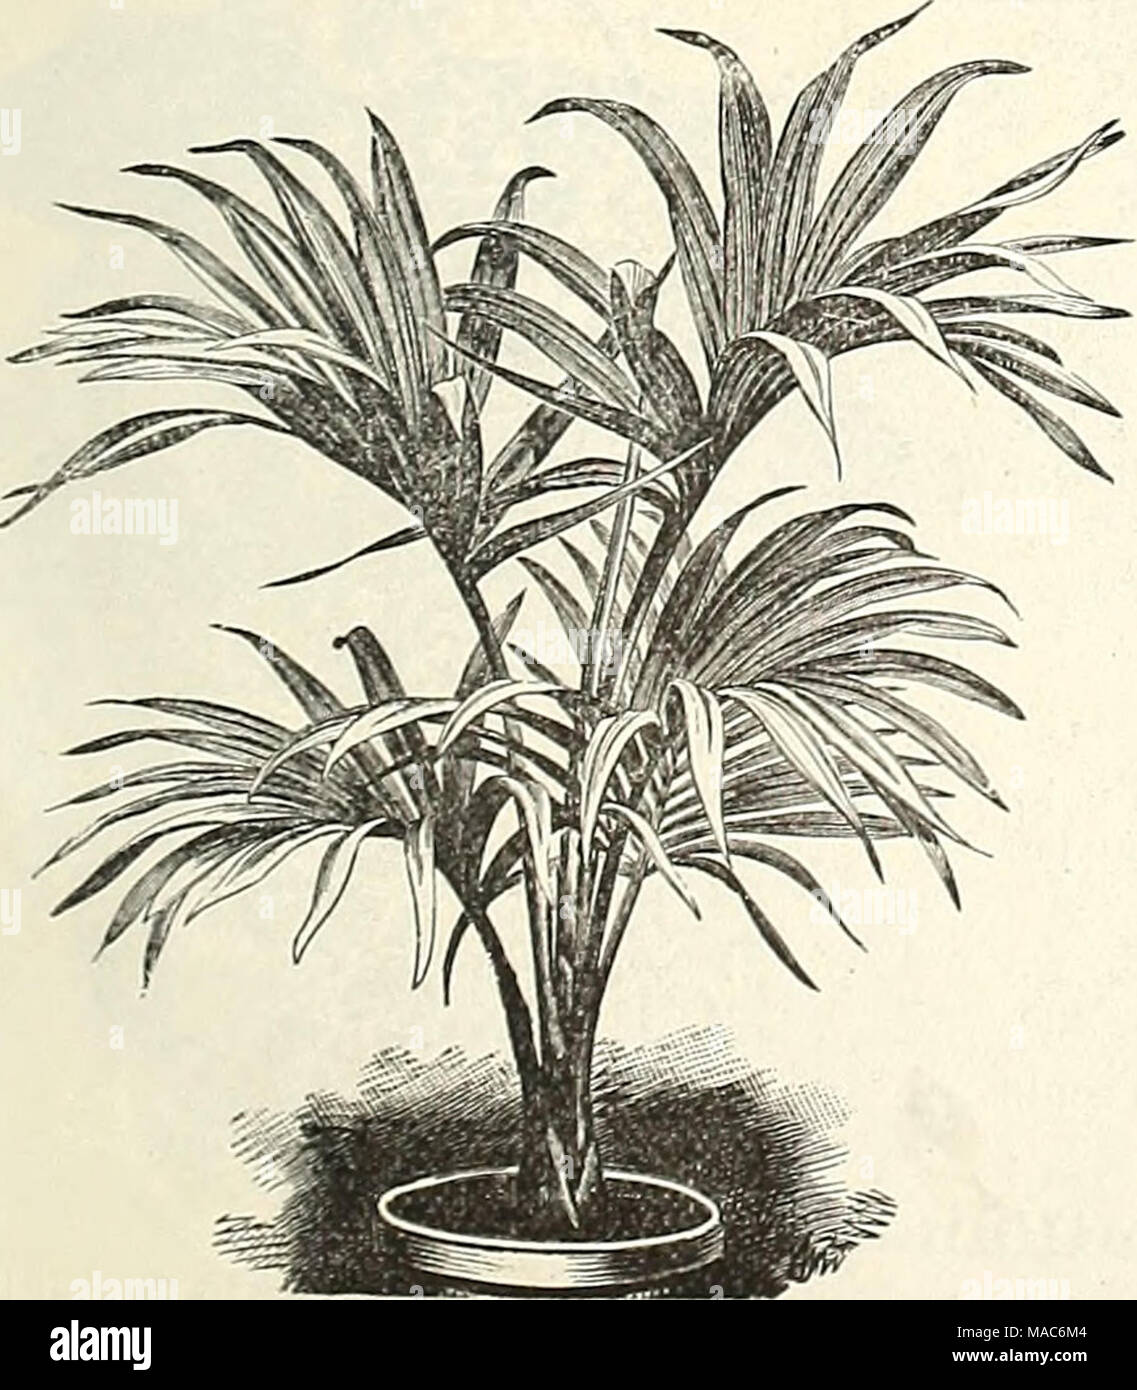 . Dreer's quarterly wholesale price list of seeds, plants, implements, &amp;c. : winter edition, January 1893 March . KENTIA BELMOREANA. Kentia Belmoreana. Inches high. Per doz. Per 100 2} inch pots $2 00 |15 00 3 &quot; '• 10 3 00 25 00 4 &quot; &quot; 15 6 00 '50 00 5 &quot; &quot; 18 12 00 100 00 Kentia Fosteriana. Inches high. Per doz. Per 000 3 inch pots 12 $3 00 $25 00 4 &quot; &quot; 18 6 00 50 00 5 &quot; &quot; 24 12 00 100 00 Cocos Weddelliana. Our immense stock of beautiful young plants for growing on, 2^ inch pots, 6 to 8 inches high, $2.00 per dozen ; $15.00 per 100 ; §125.00 per  Stock Photo